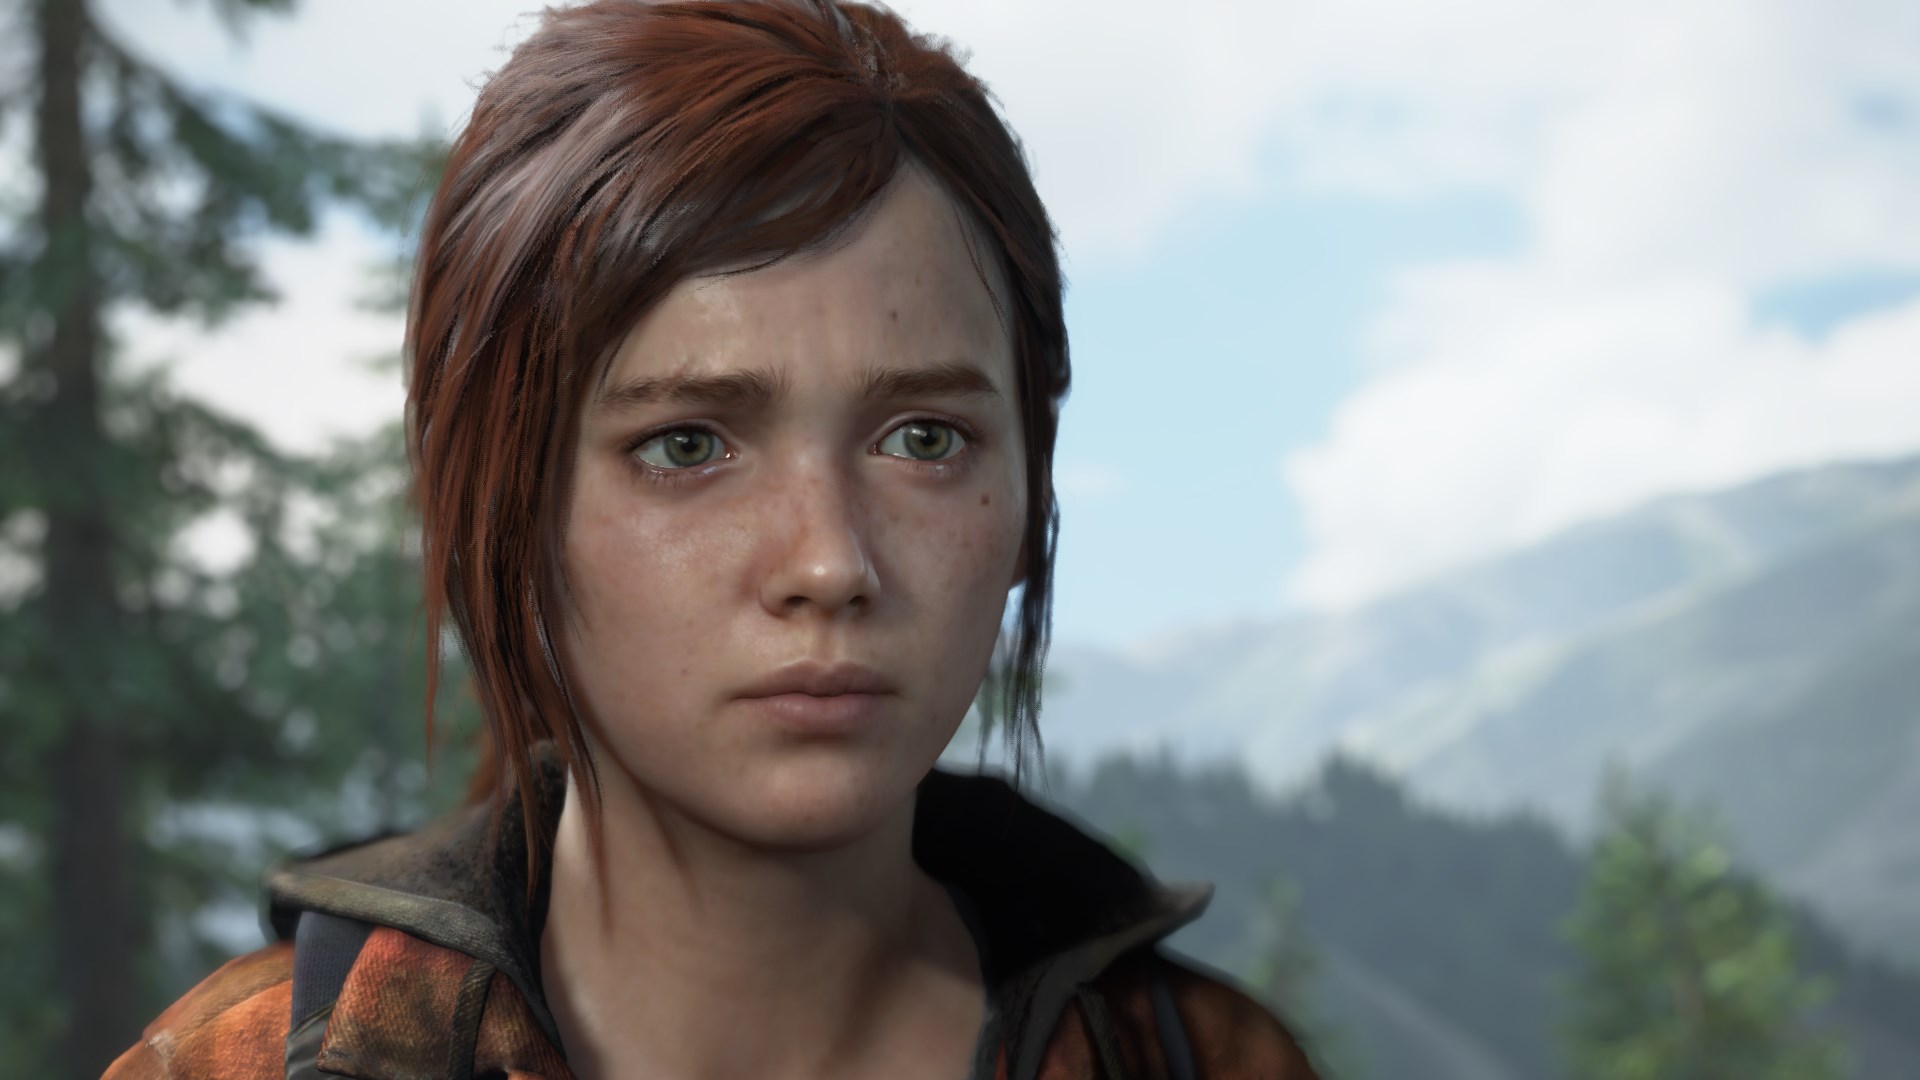 Ellie looking somber asking Joel about what actually happened with the Fireflies